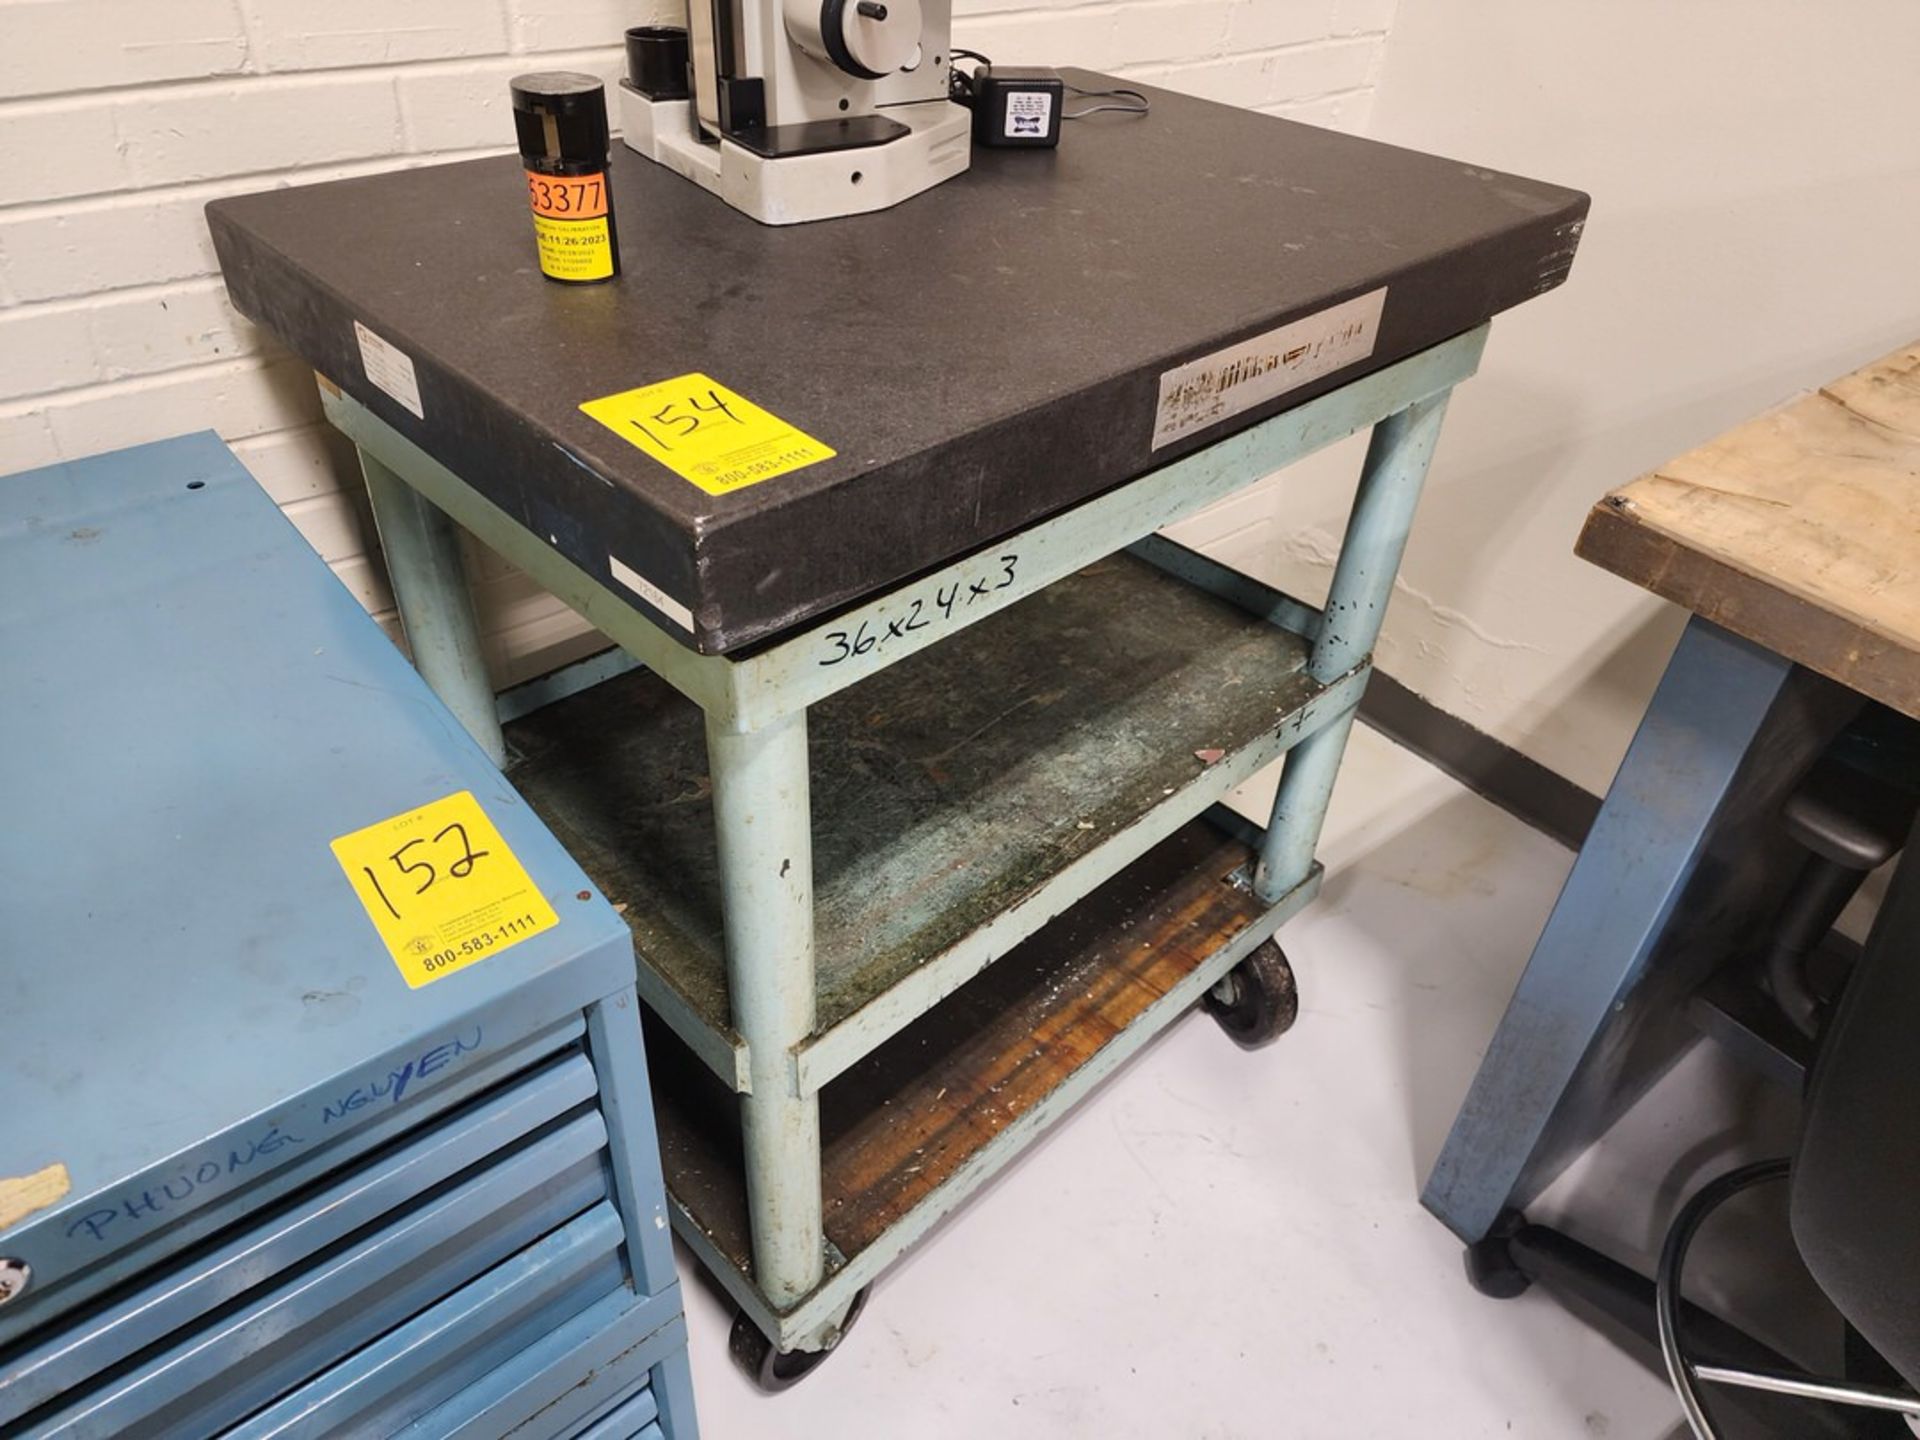 Granite Table 36" x 24" x 3" W/ Stand (Toyoda CNC Area) - Image 2 of 3